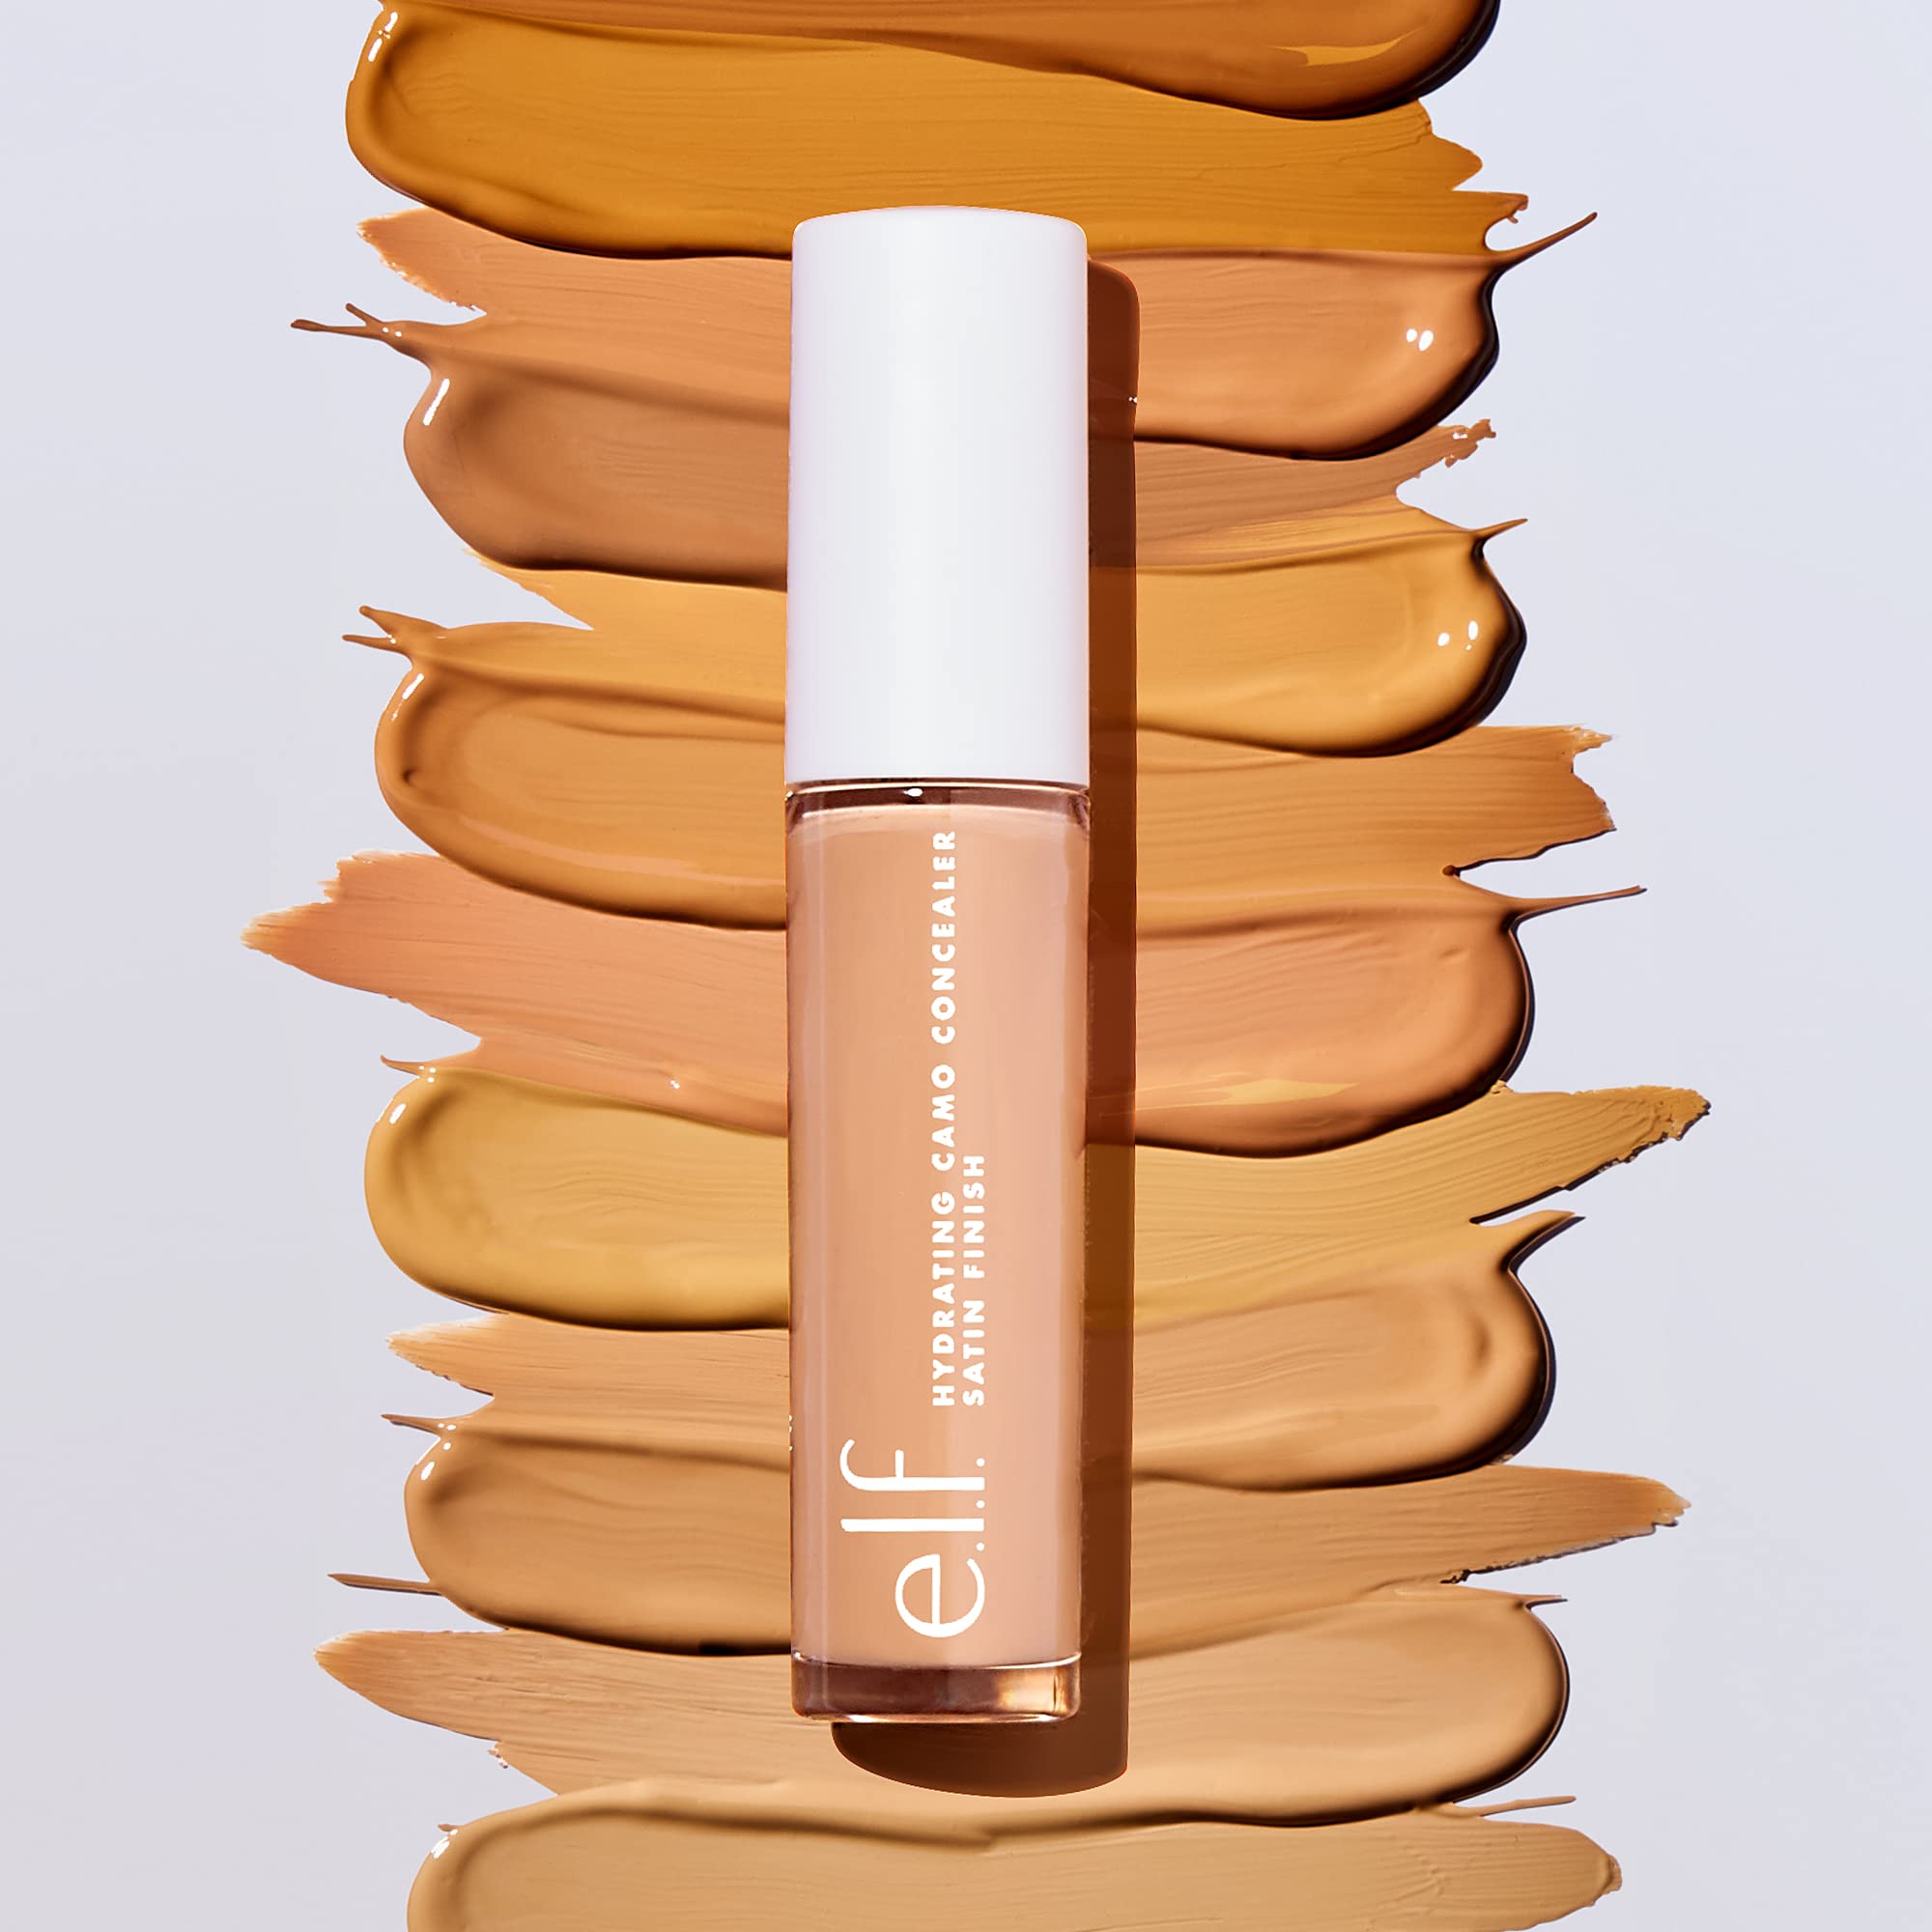 e.l.f., Hydrating Camo Concealer, Lightweight, Full Coverage, Long Lasting, Conceals, Corrects, Covers, Hydrates, Highlights, Light Sand, Satin Finish, 25 Shades, All-Day Wear, 0.20 Fl Oz